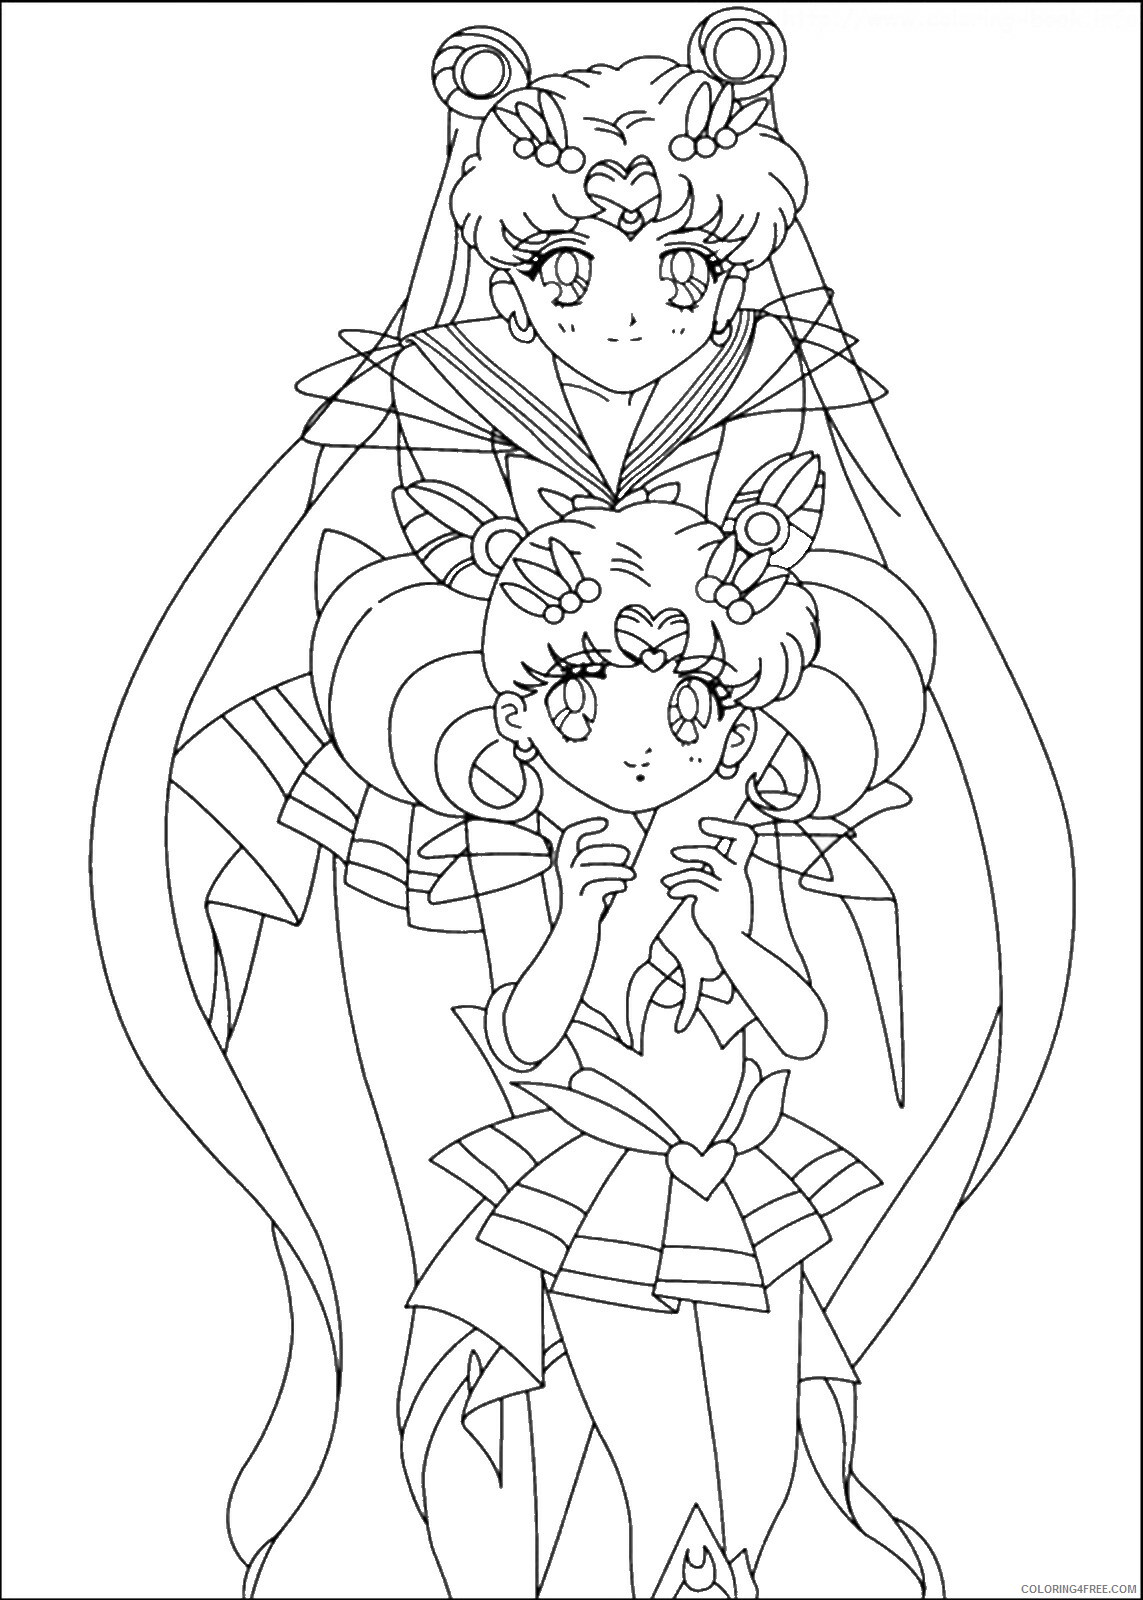 Sailor Moon Printable Coloring Pages Anime sailor_moon_cl27 2021 0975 Coloring4free